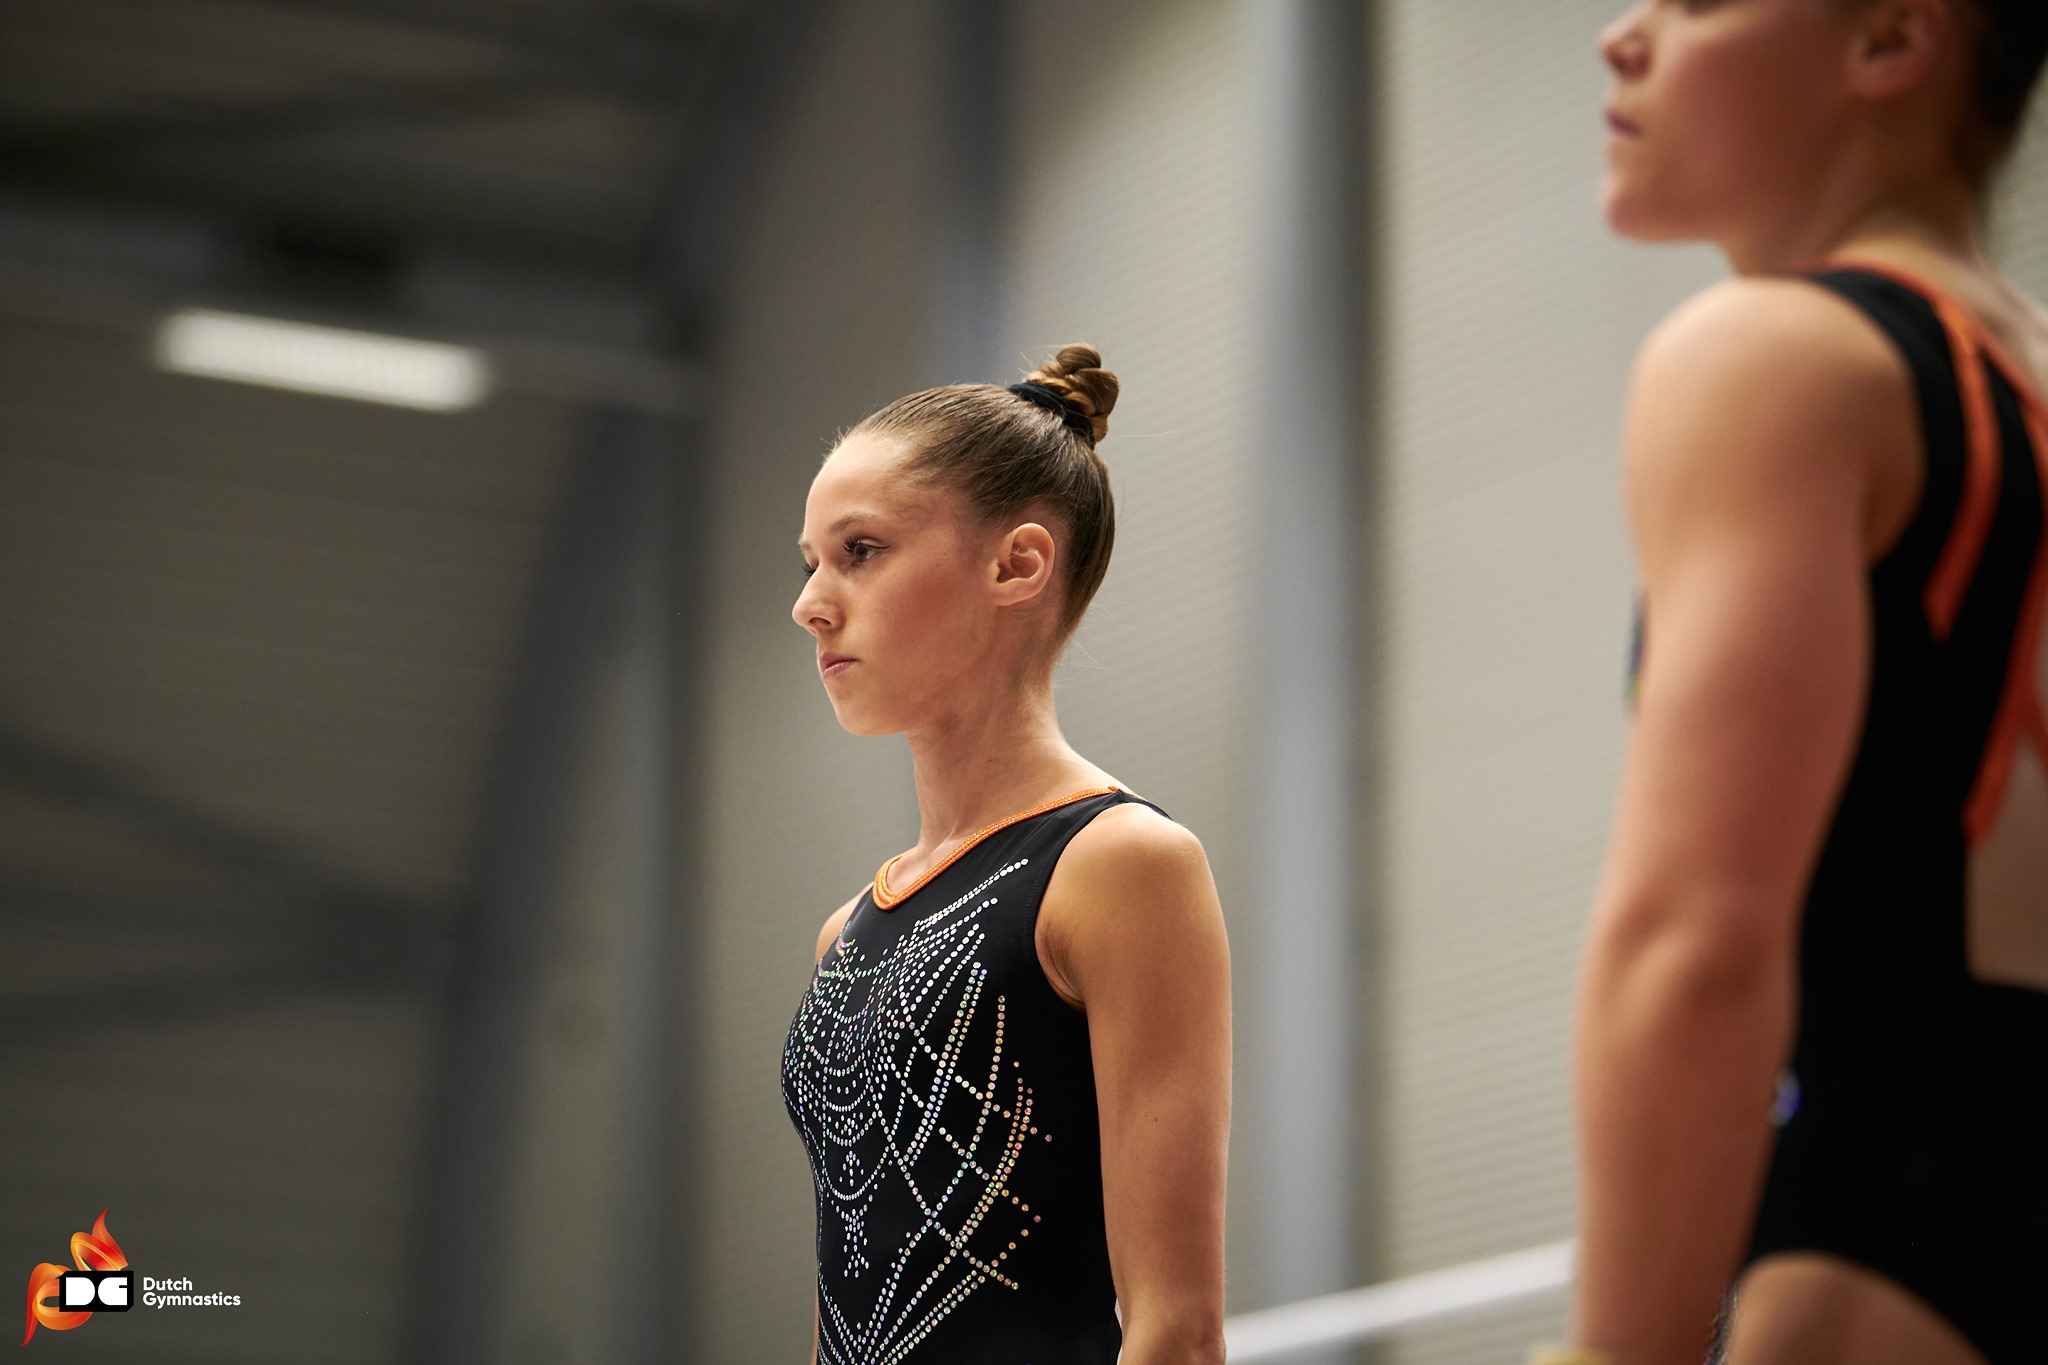 A Gymnast Who Deserves More Attention – An Old School Gymnastics Blog